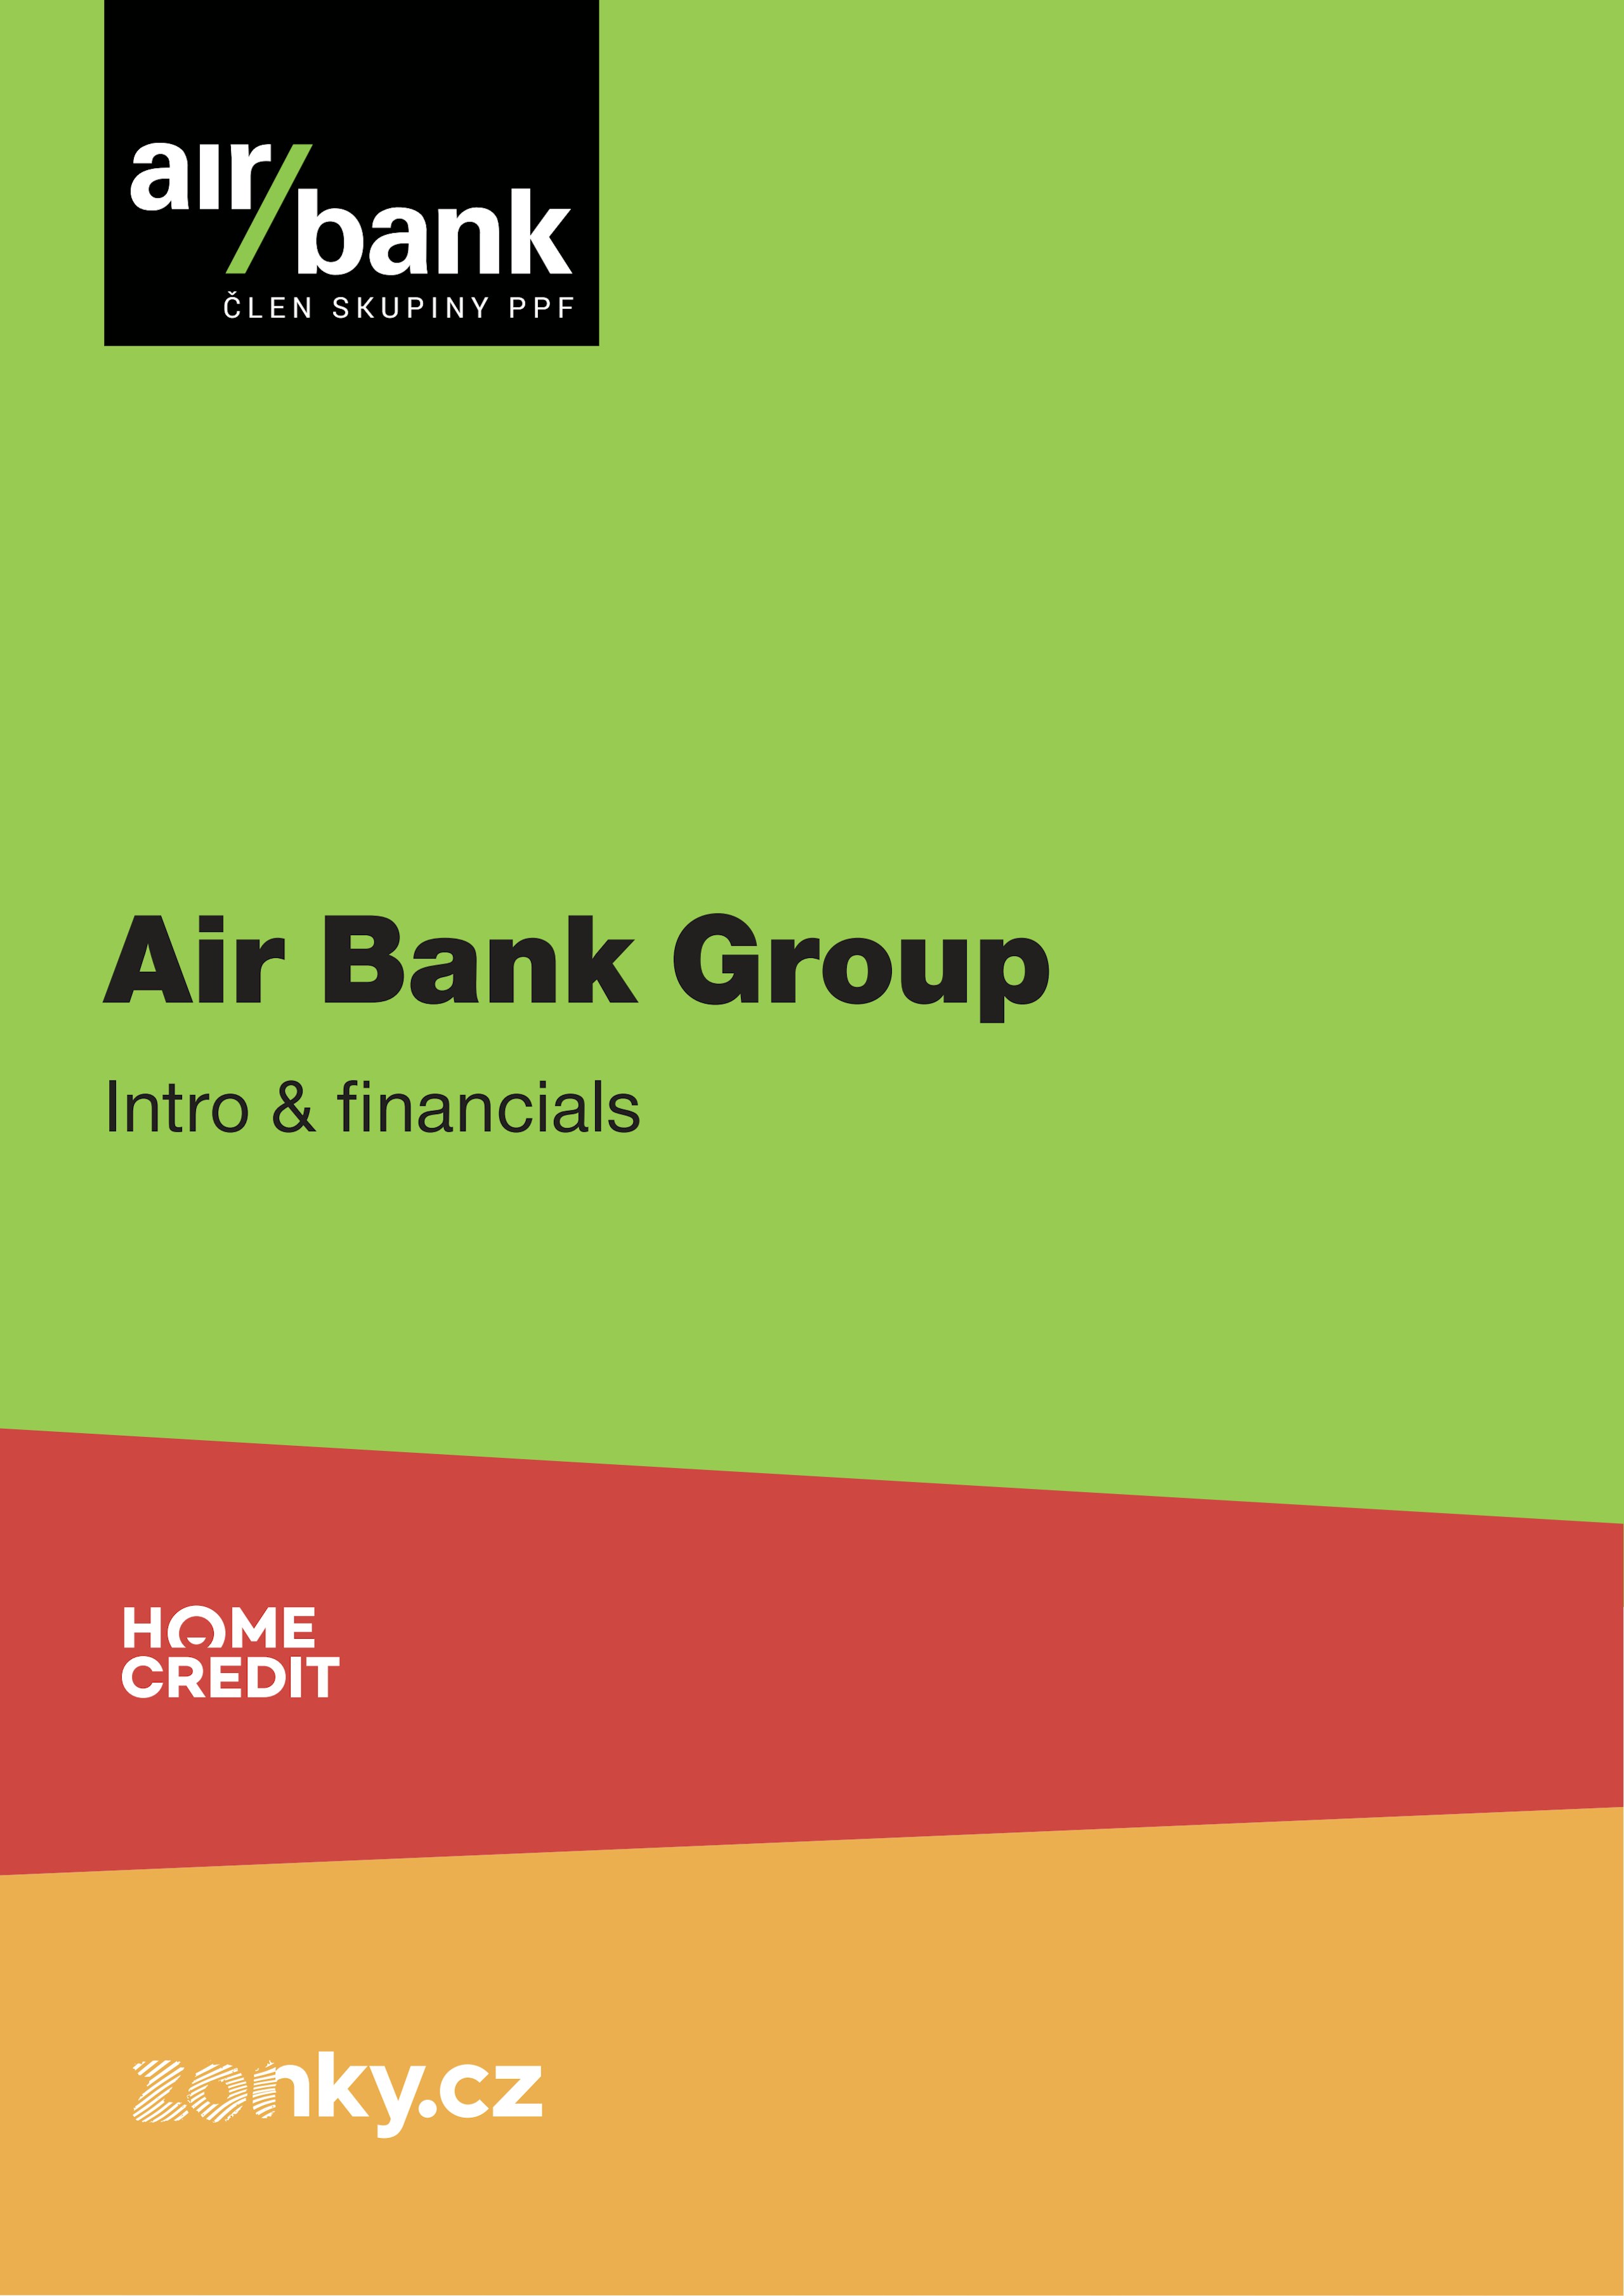 Air Bank Group - Introduction & financial details - presentation